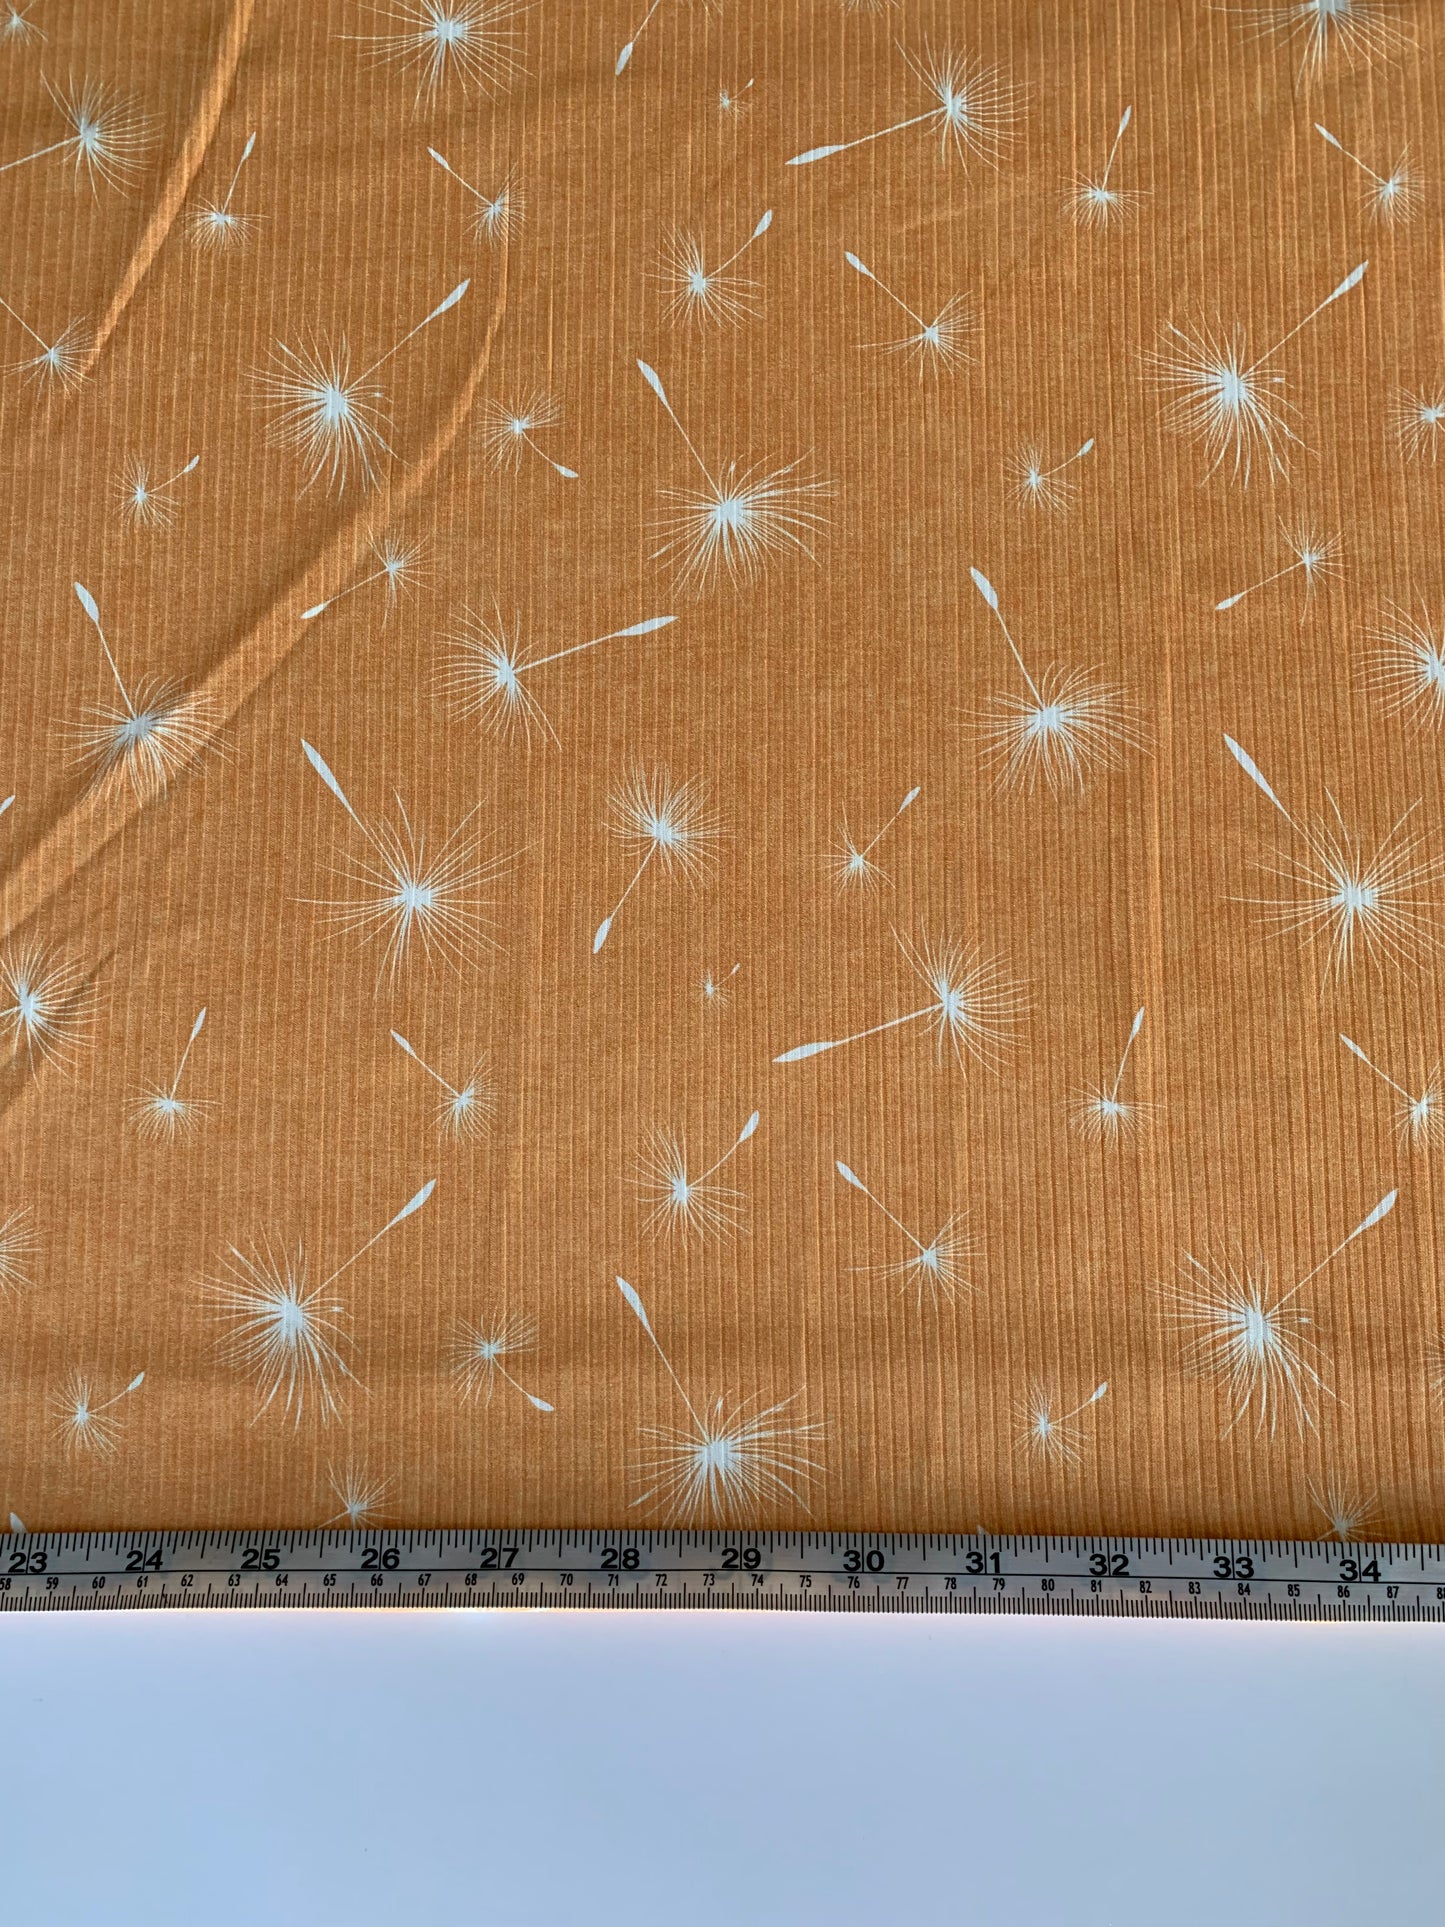 Dandelion Dust in Golden Yellow on Unbrushed Rib Knit Fabric Sold by the 1/4 yard